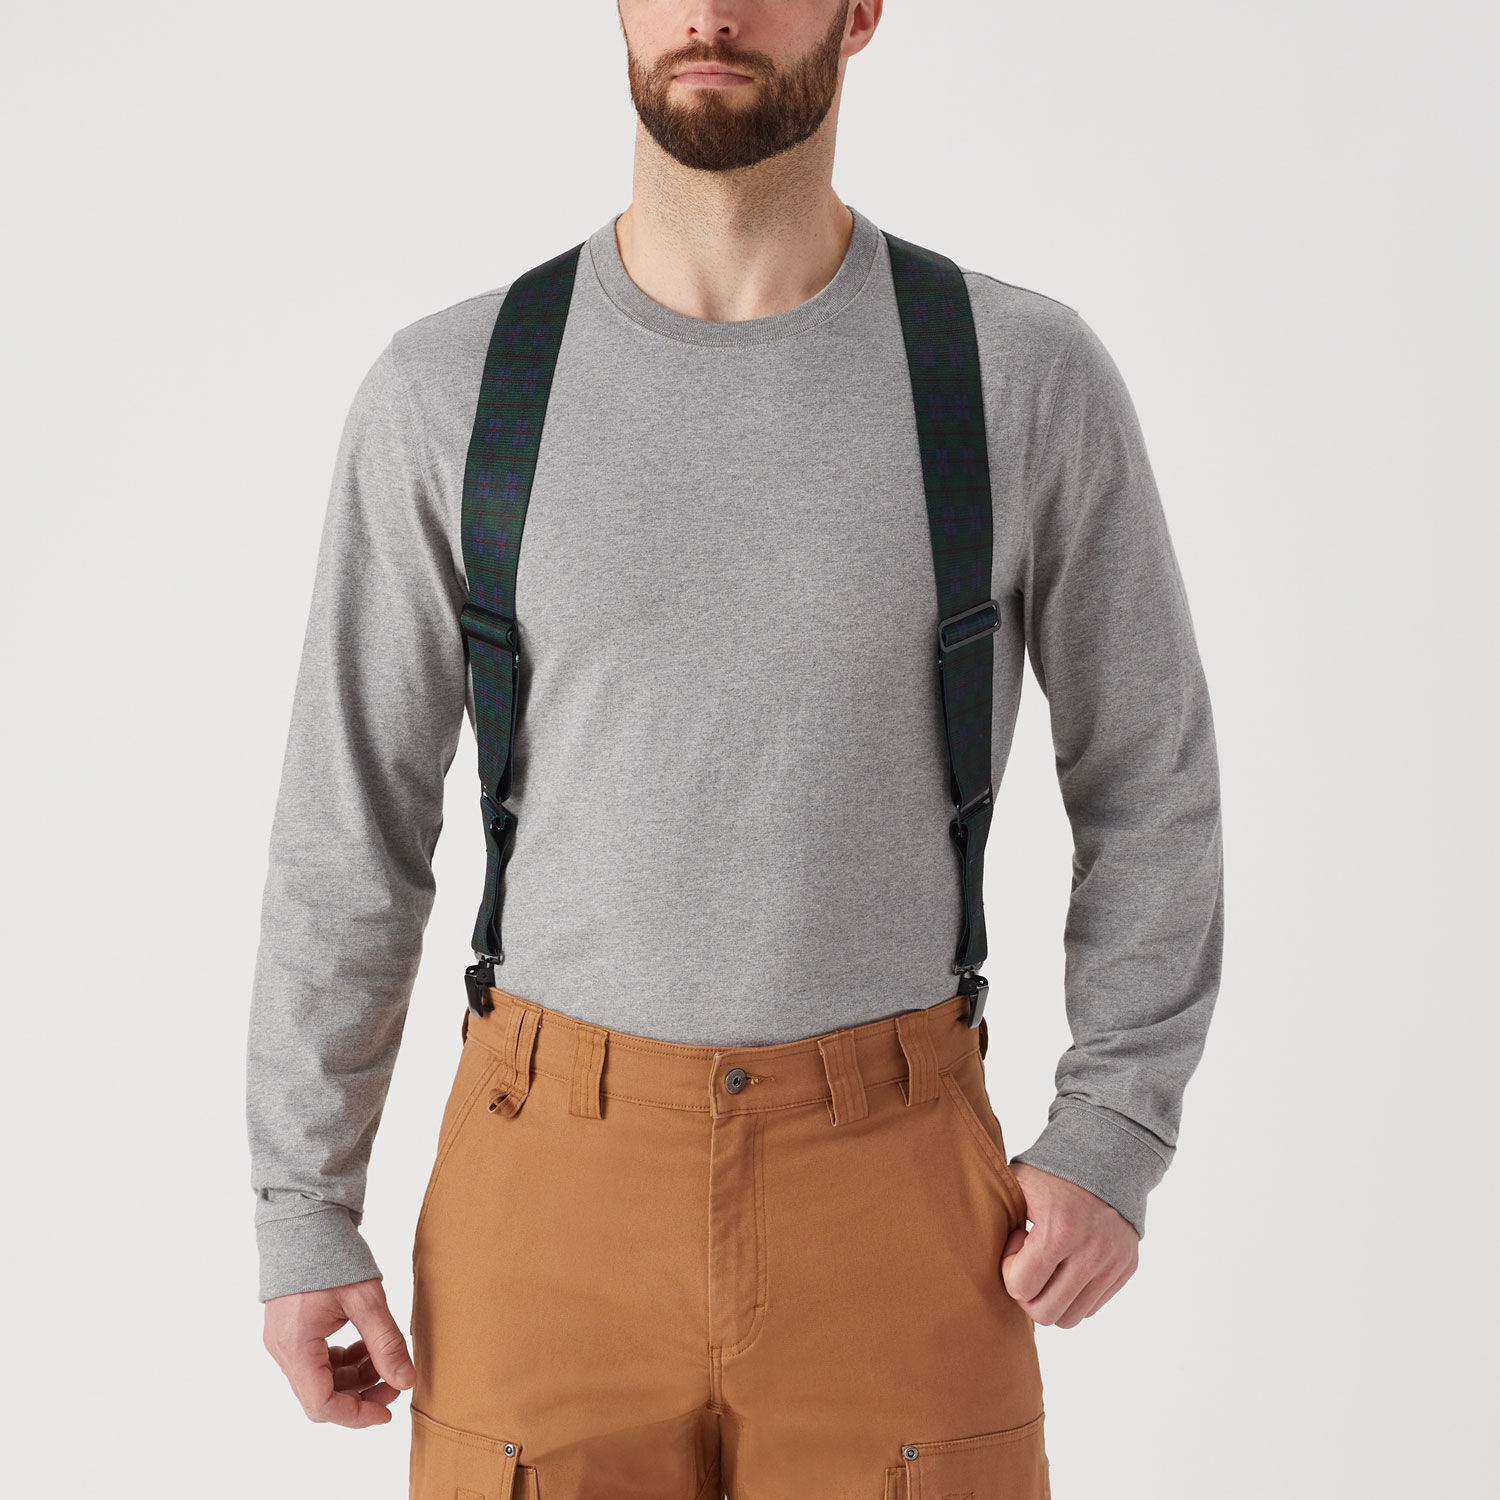 No brand - Suspenders are leather straps or fabric Worn over the shoulders  to hold up trousers with elasticated straps and most straps are of woven  cloth forming an X and Y